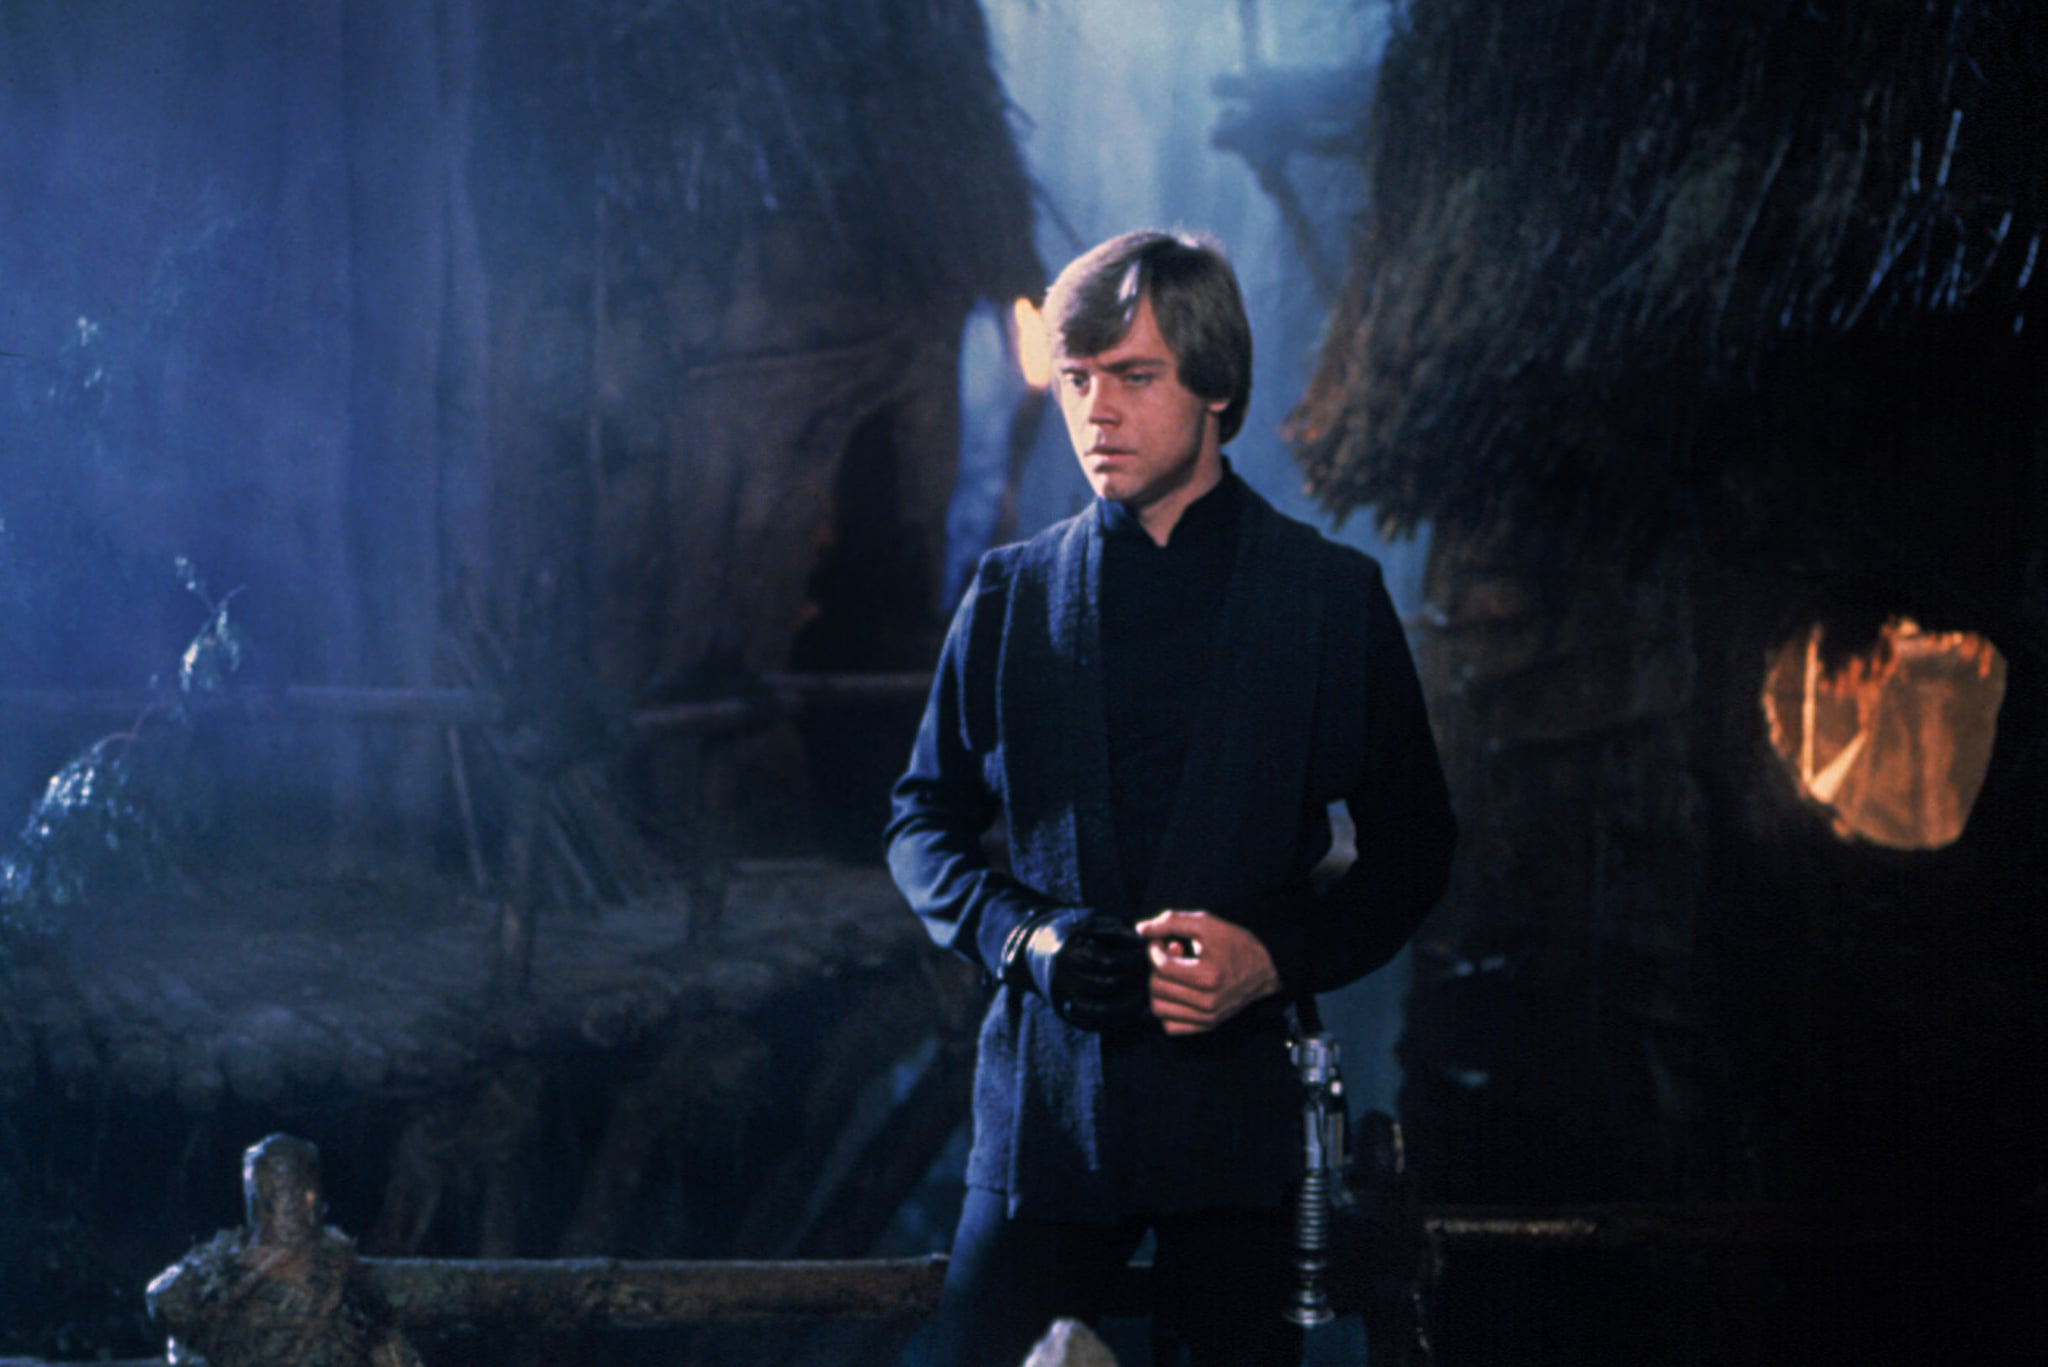 Luke Skywalker From Star Wars: Episode VI - Return of the Jedi | Tubular! These '80s Halloween Costumes Will Rock Your Leg Warmers Off | POPSUGAR Entertainment Photo 39